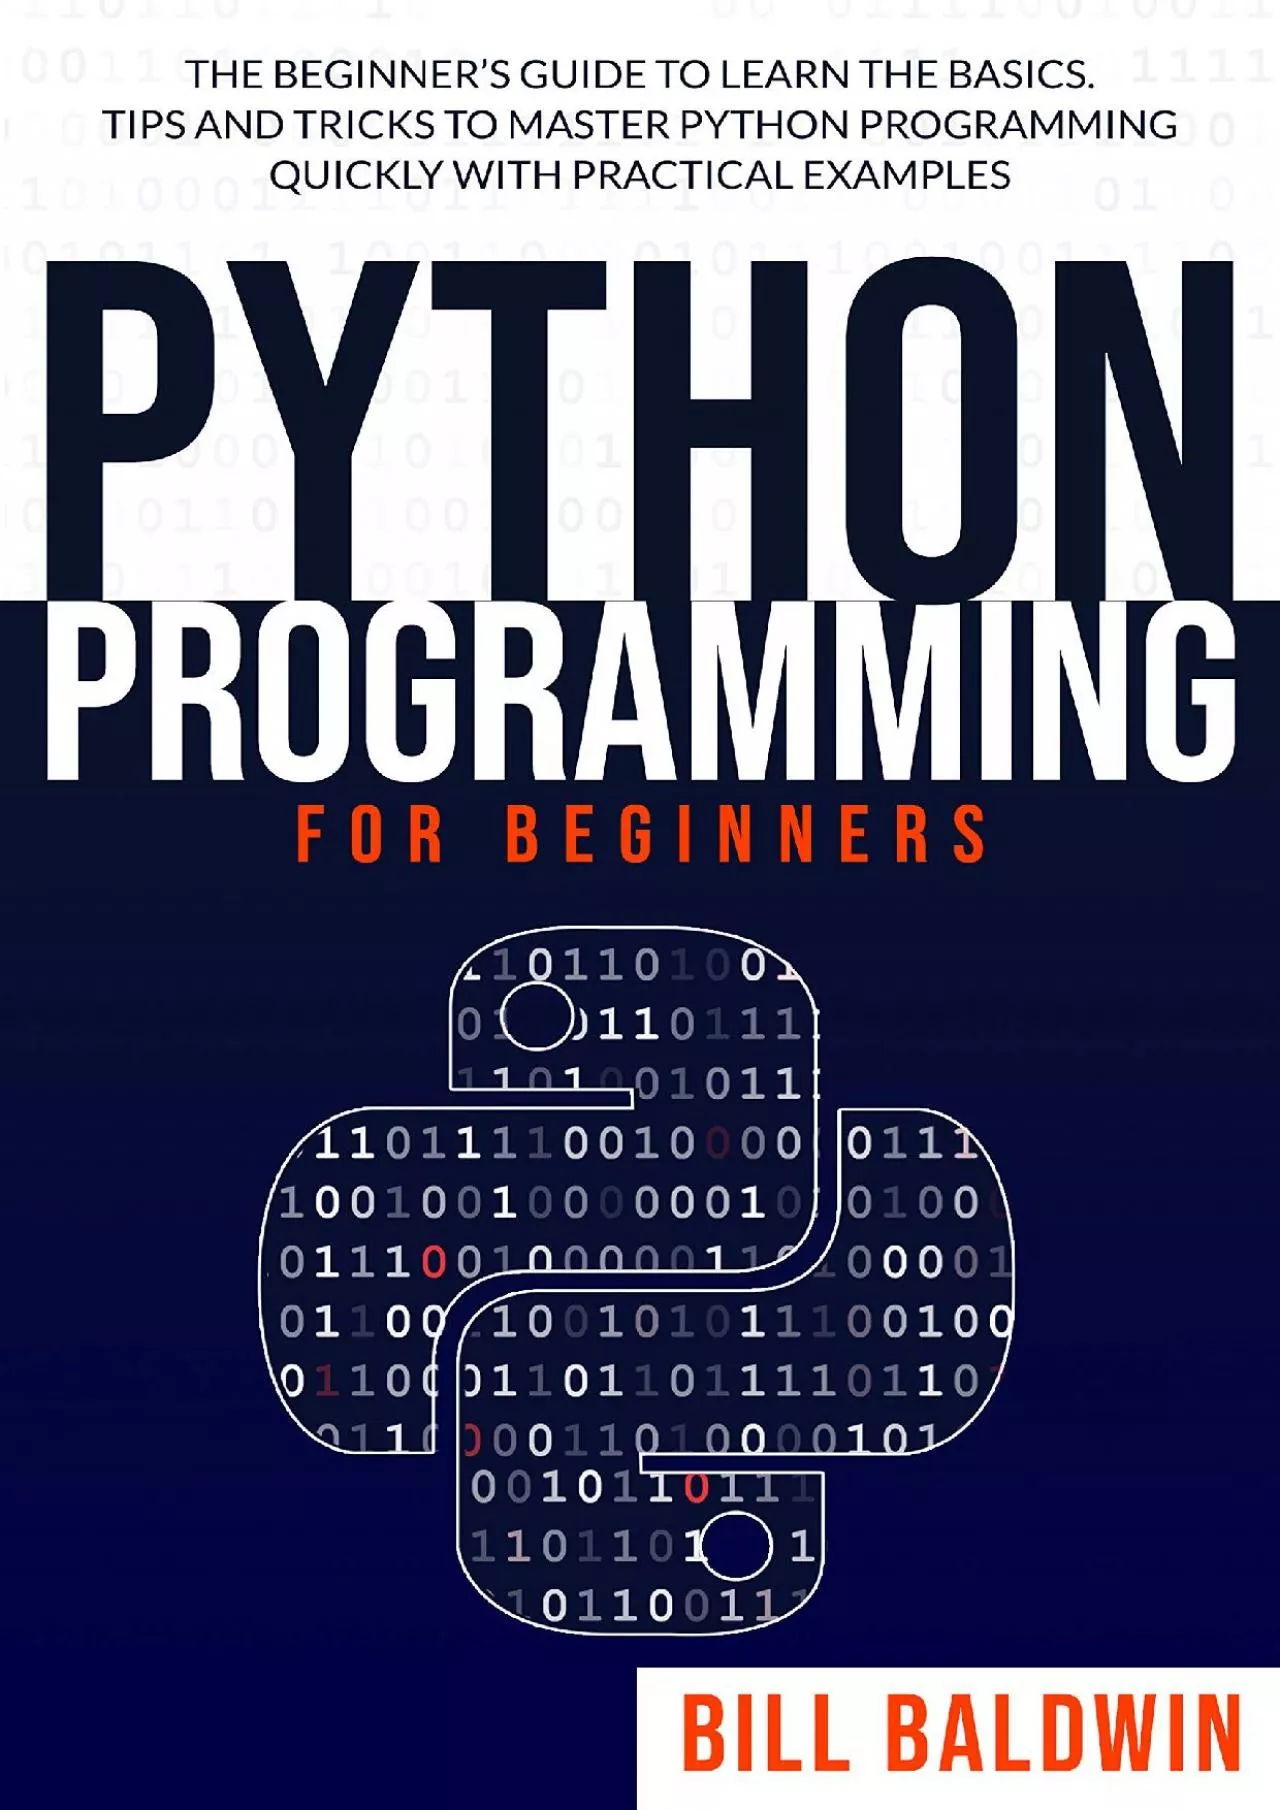 [DOWLOAD]-PYTHON PROGRAMMING FOR BEGINNERS: The beginner’s guide to learn the basics.